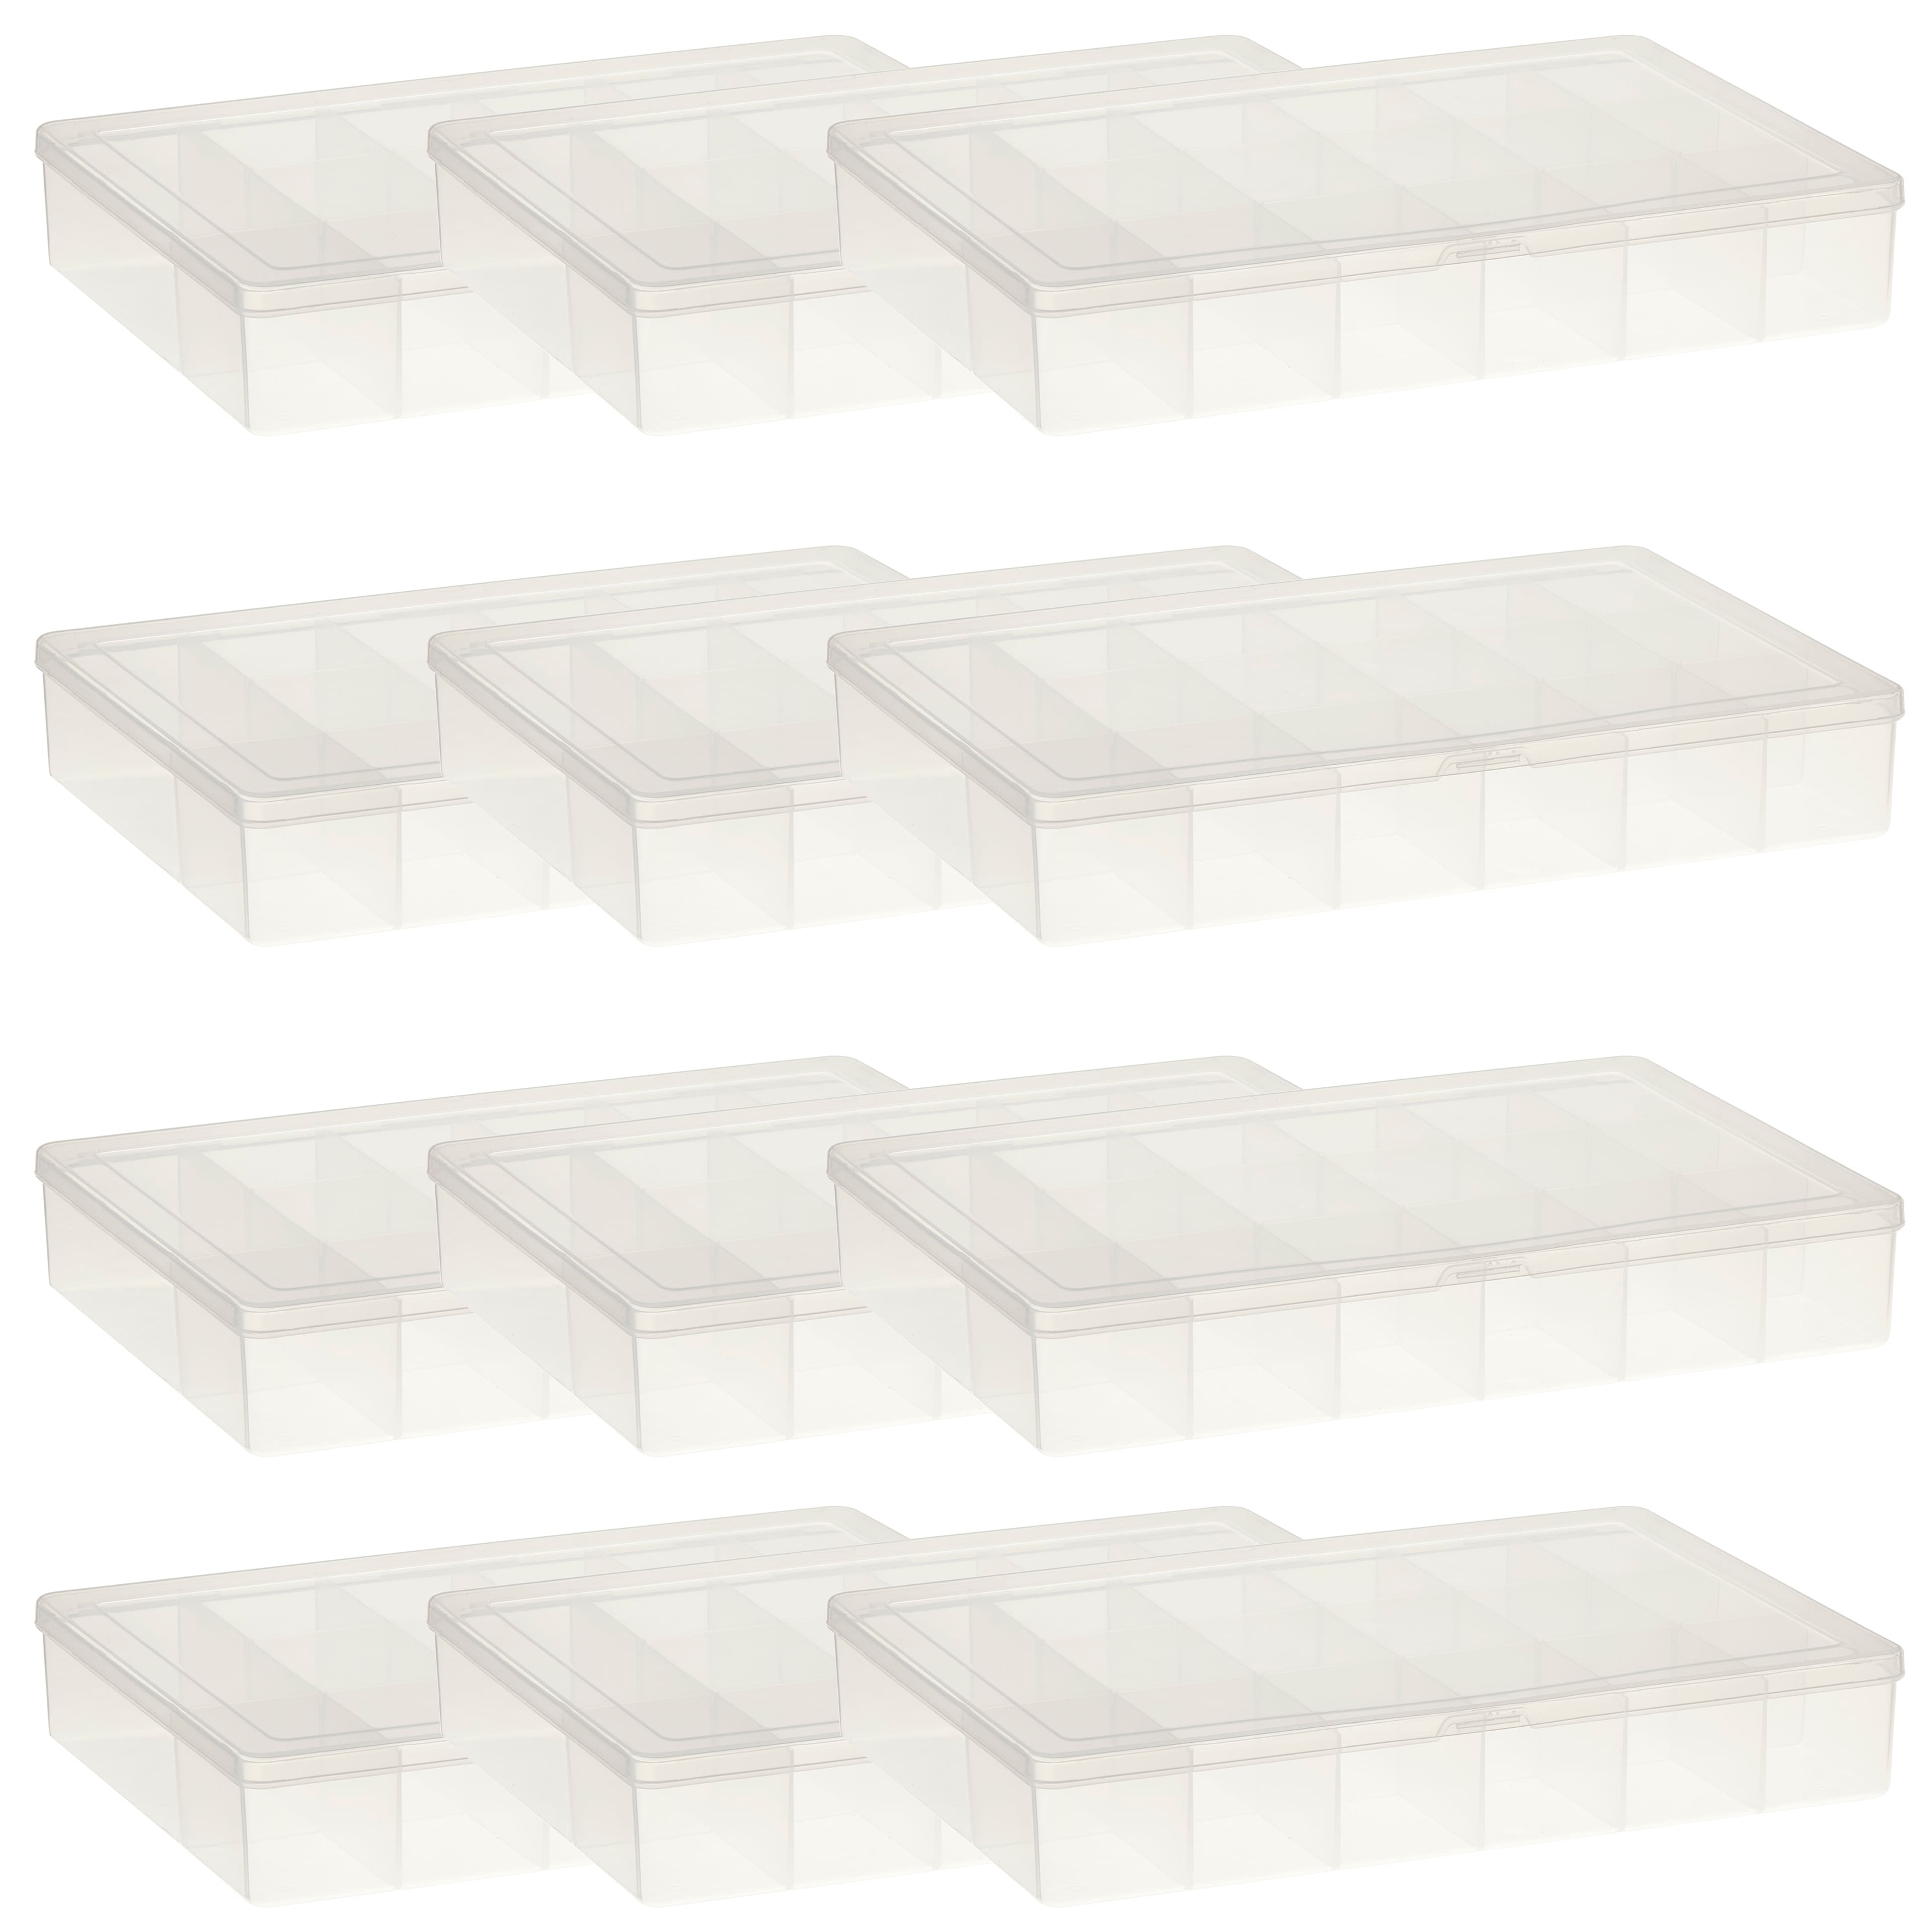 12 Pack: 17-Compartment Bead Organizer by Bead Landing